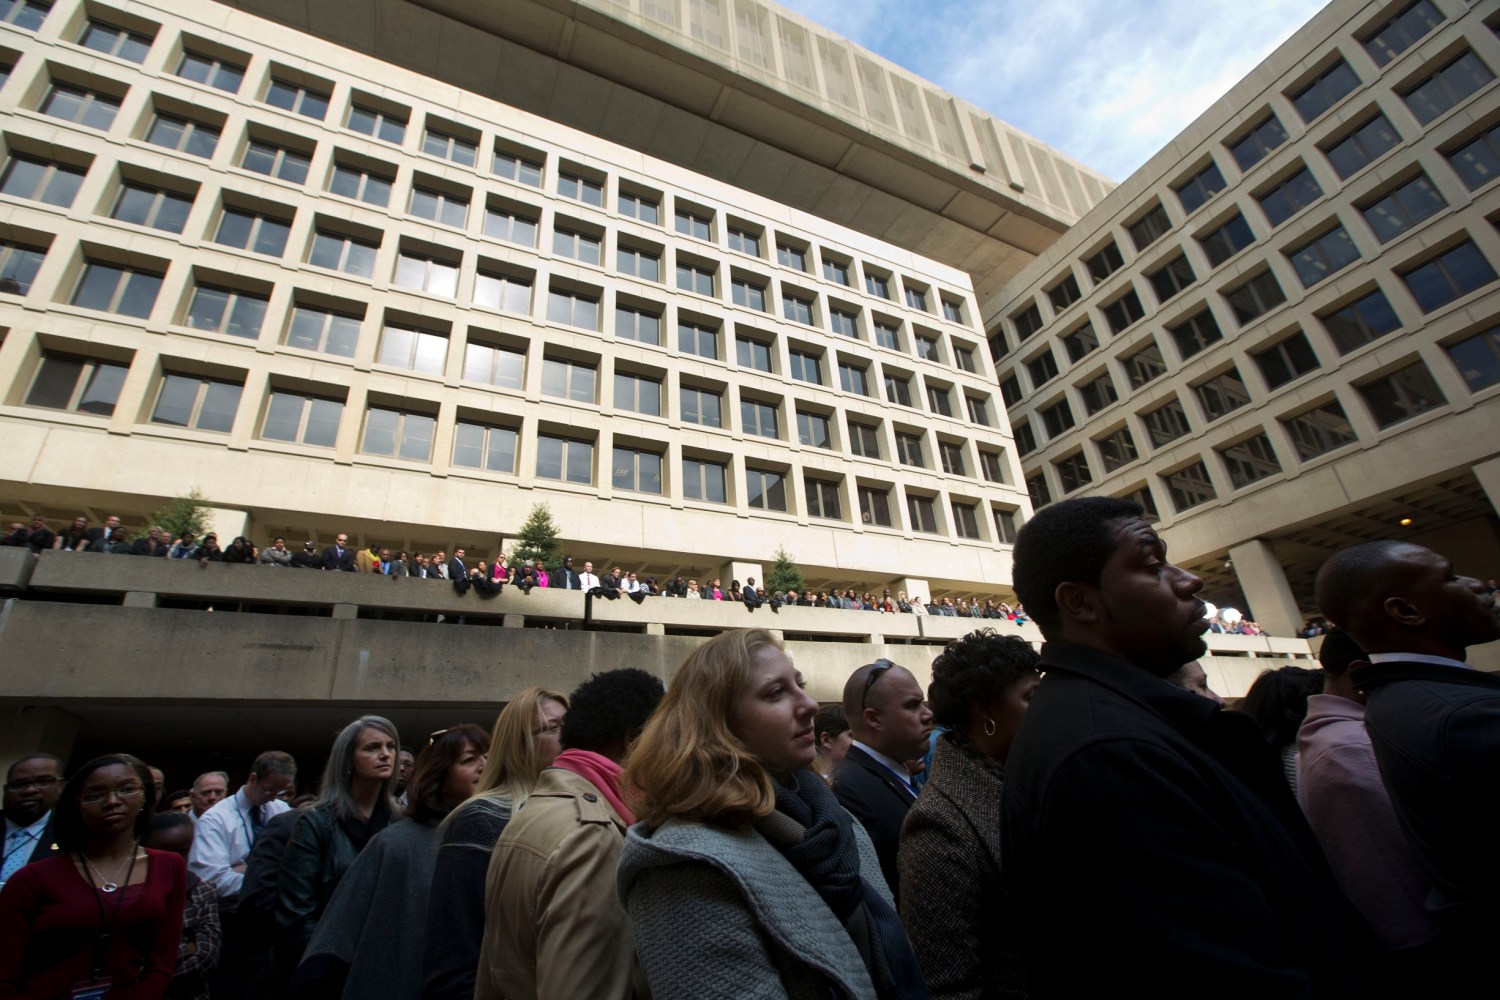 FBI staff watch the swearing-in of FBI Director James Comey at the FBI headquarters in Washington, October 28, 2013. REUTERS/Jason Reed (UNITED STATES - Tags: POLITICS CRIME LAW) - RTX14RTZ